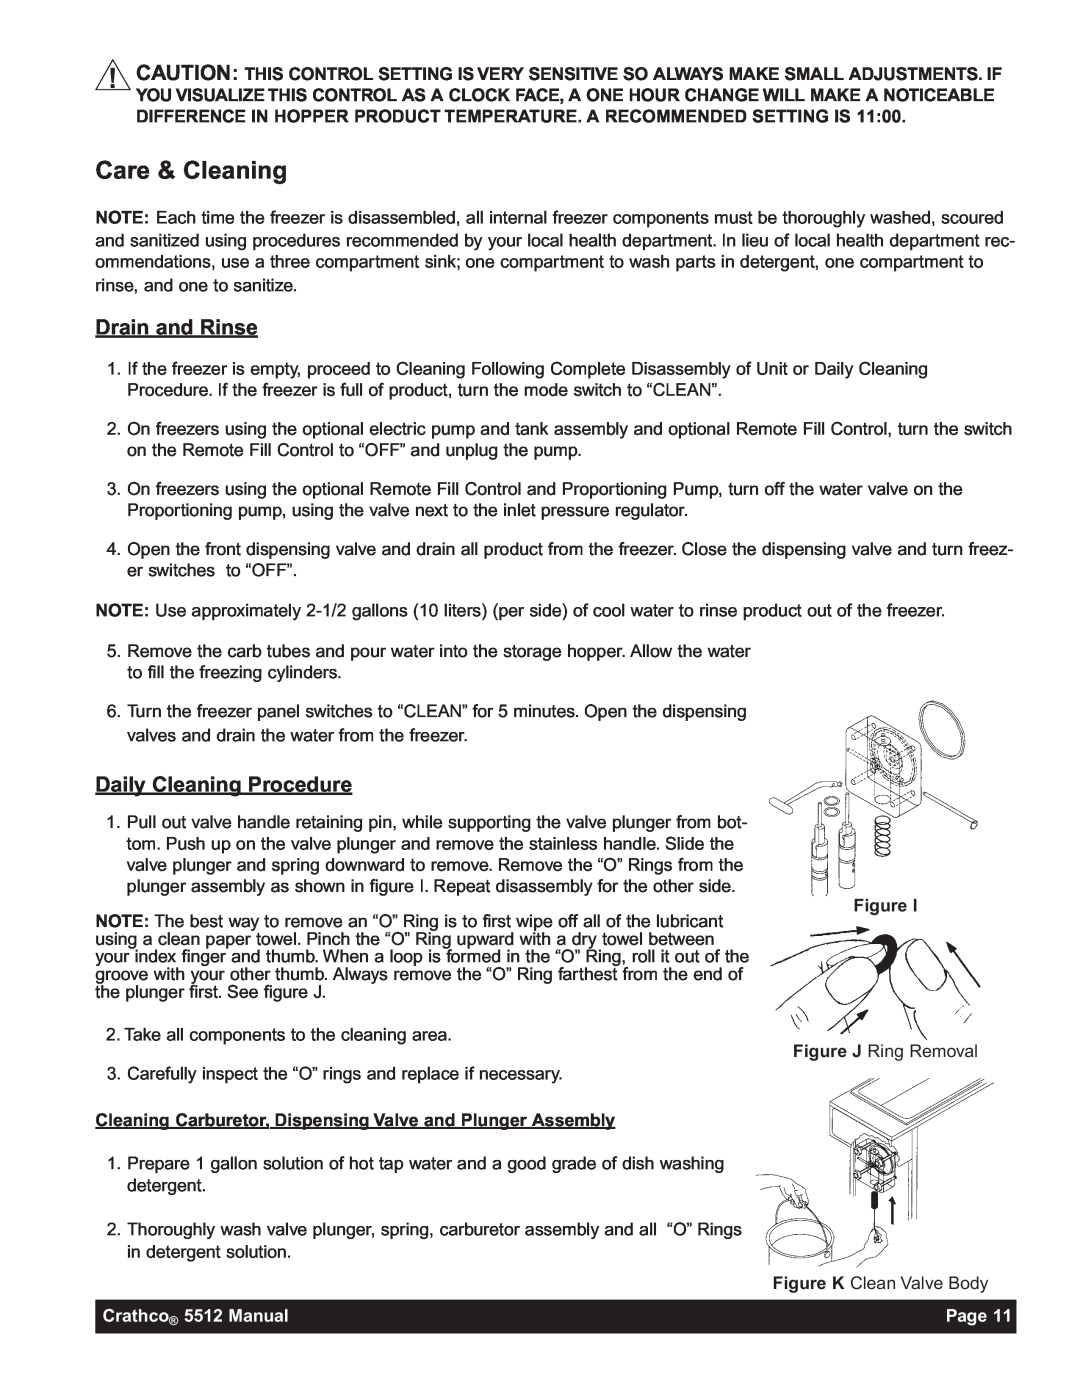 Grindmaster 5512E Care & Cleaning, Drain and Rinse, Daily Cleaning Procedure, Crathco 5512 Manual, Page 